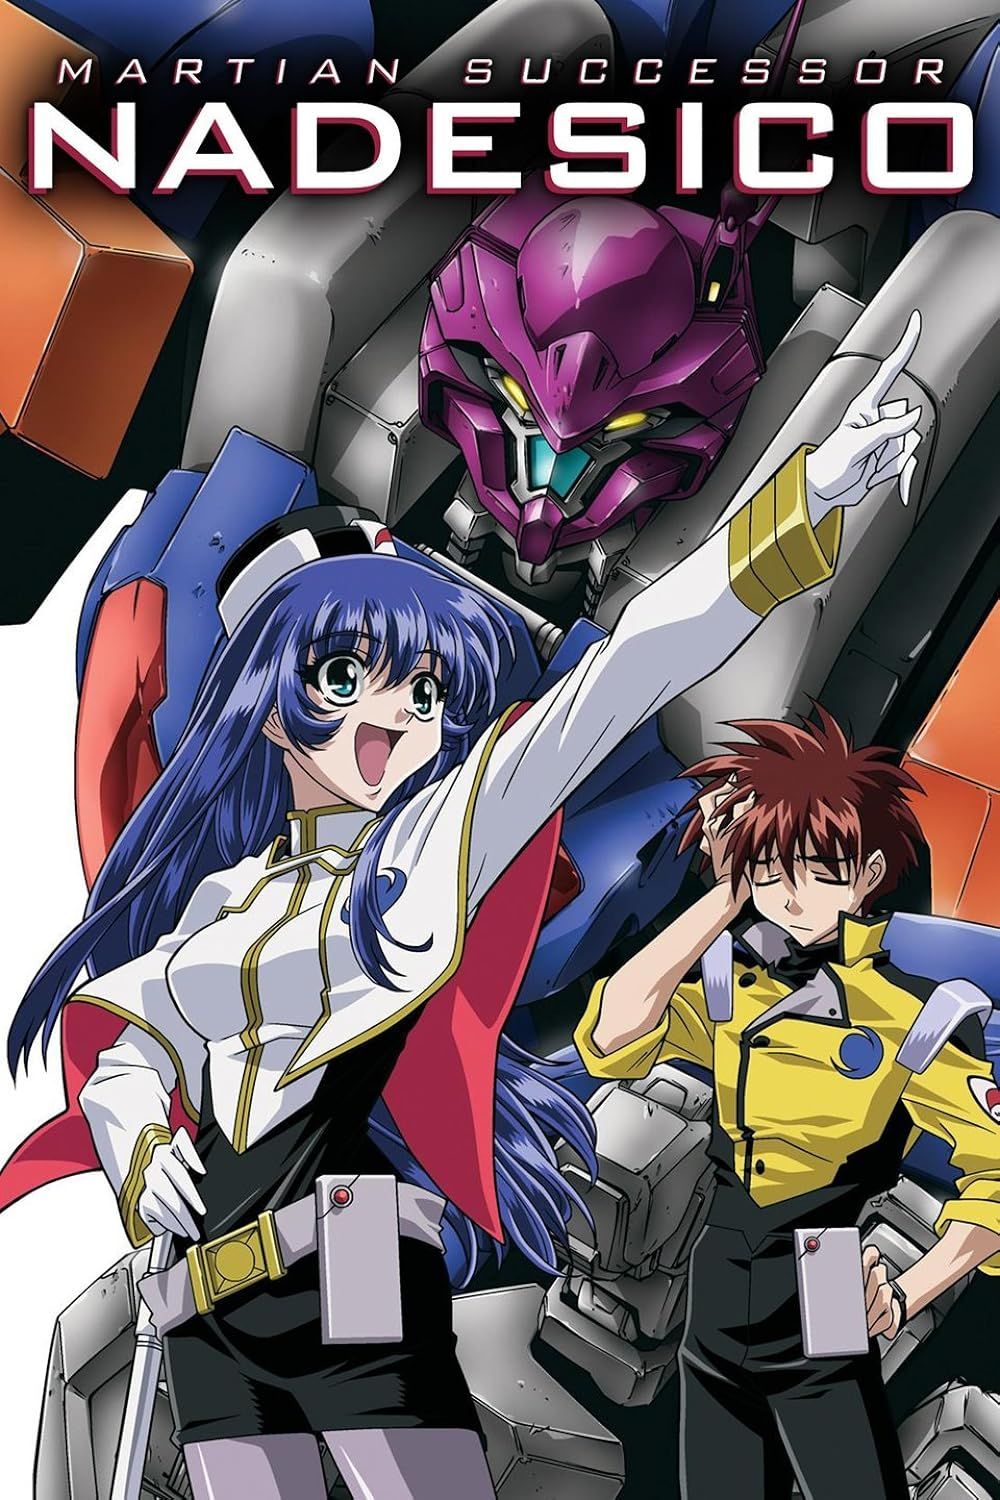 Yurika Poses Excitedly While Akito Looks Exasperated While Standing in Front of a Mecha in Martian Successor Nadesico